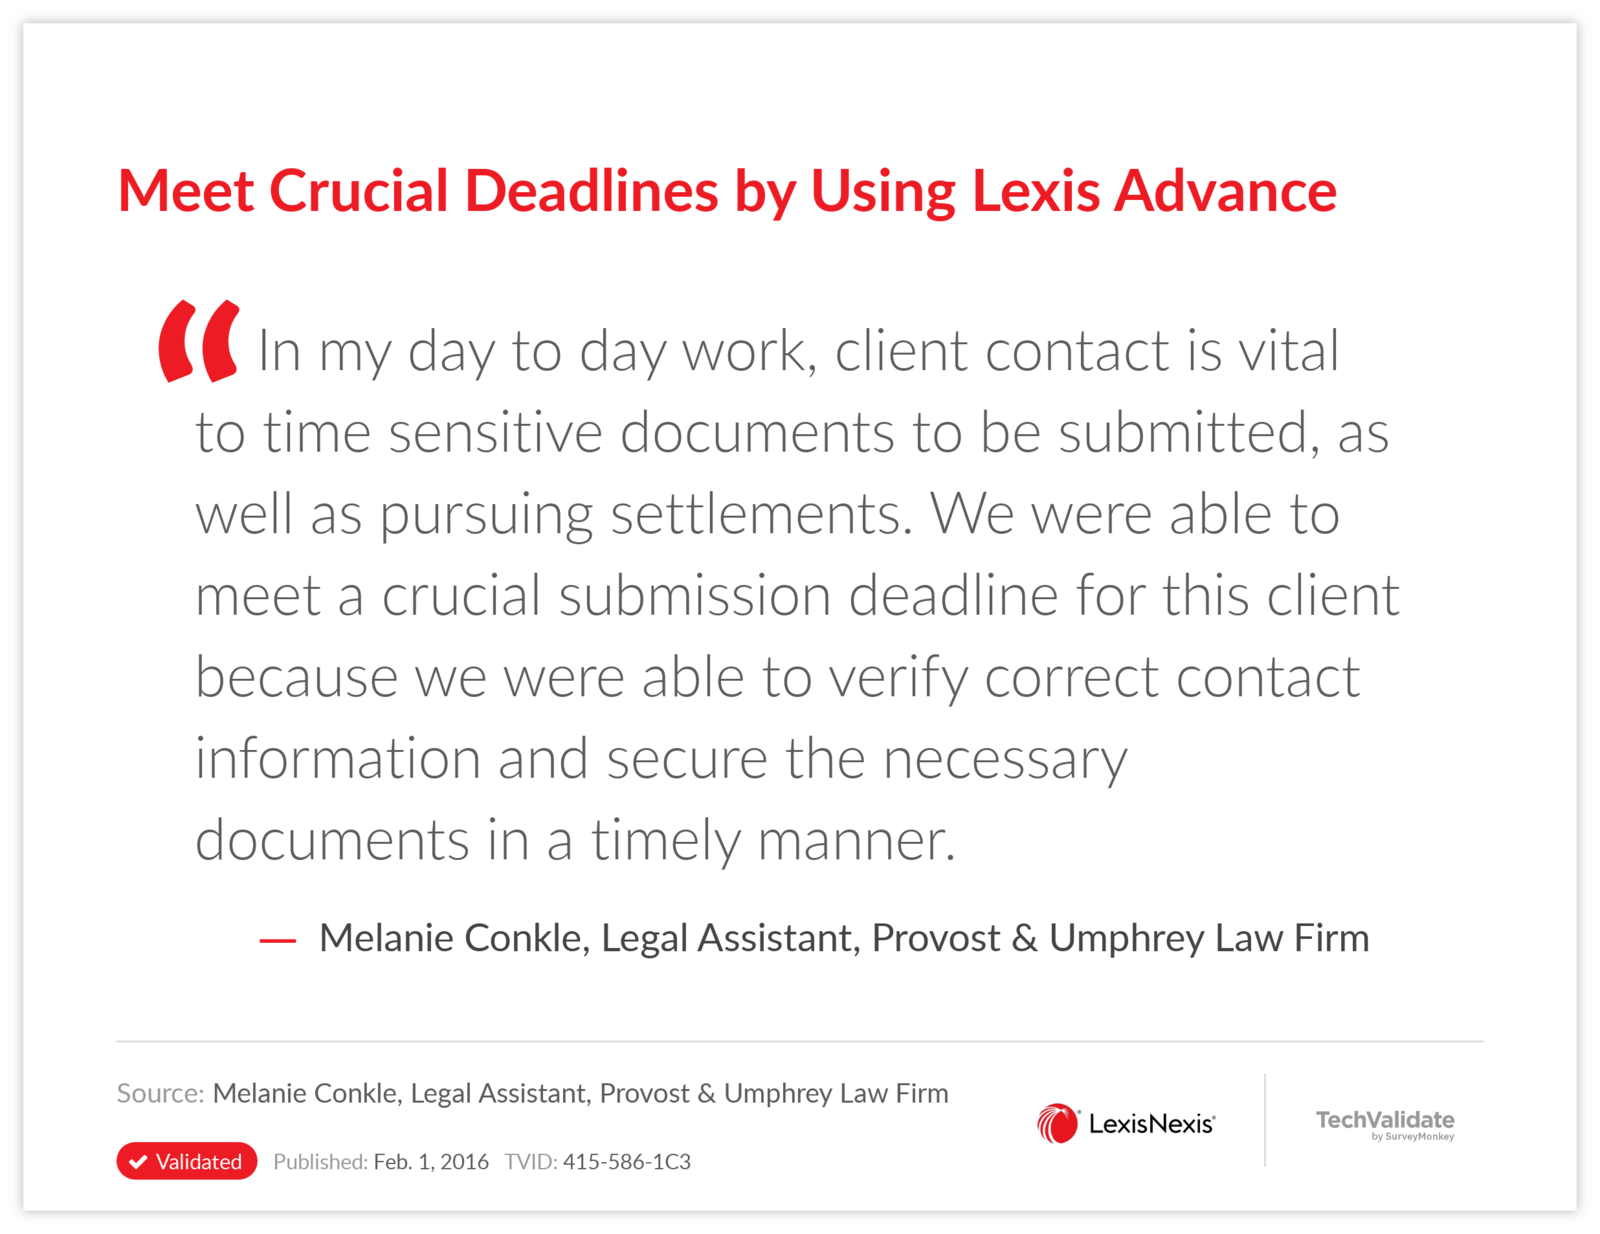 Meet Crucial Deadlines by Using Lexis Advance